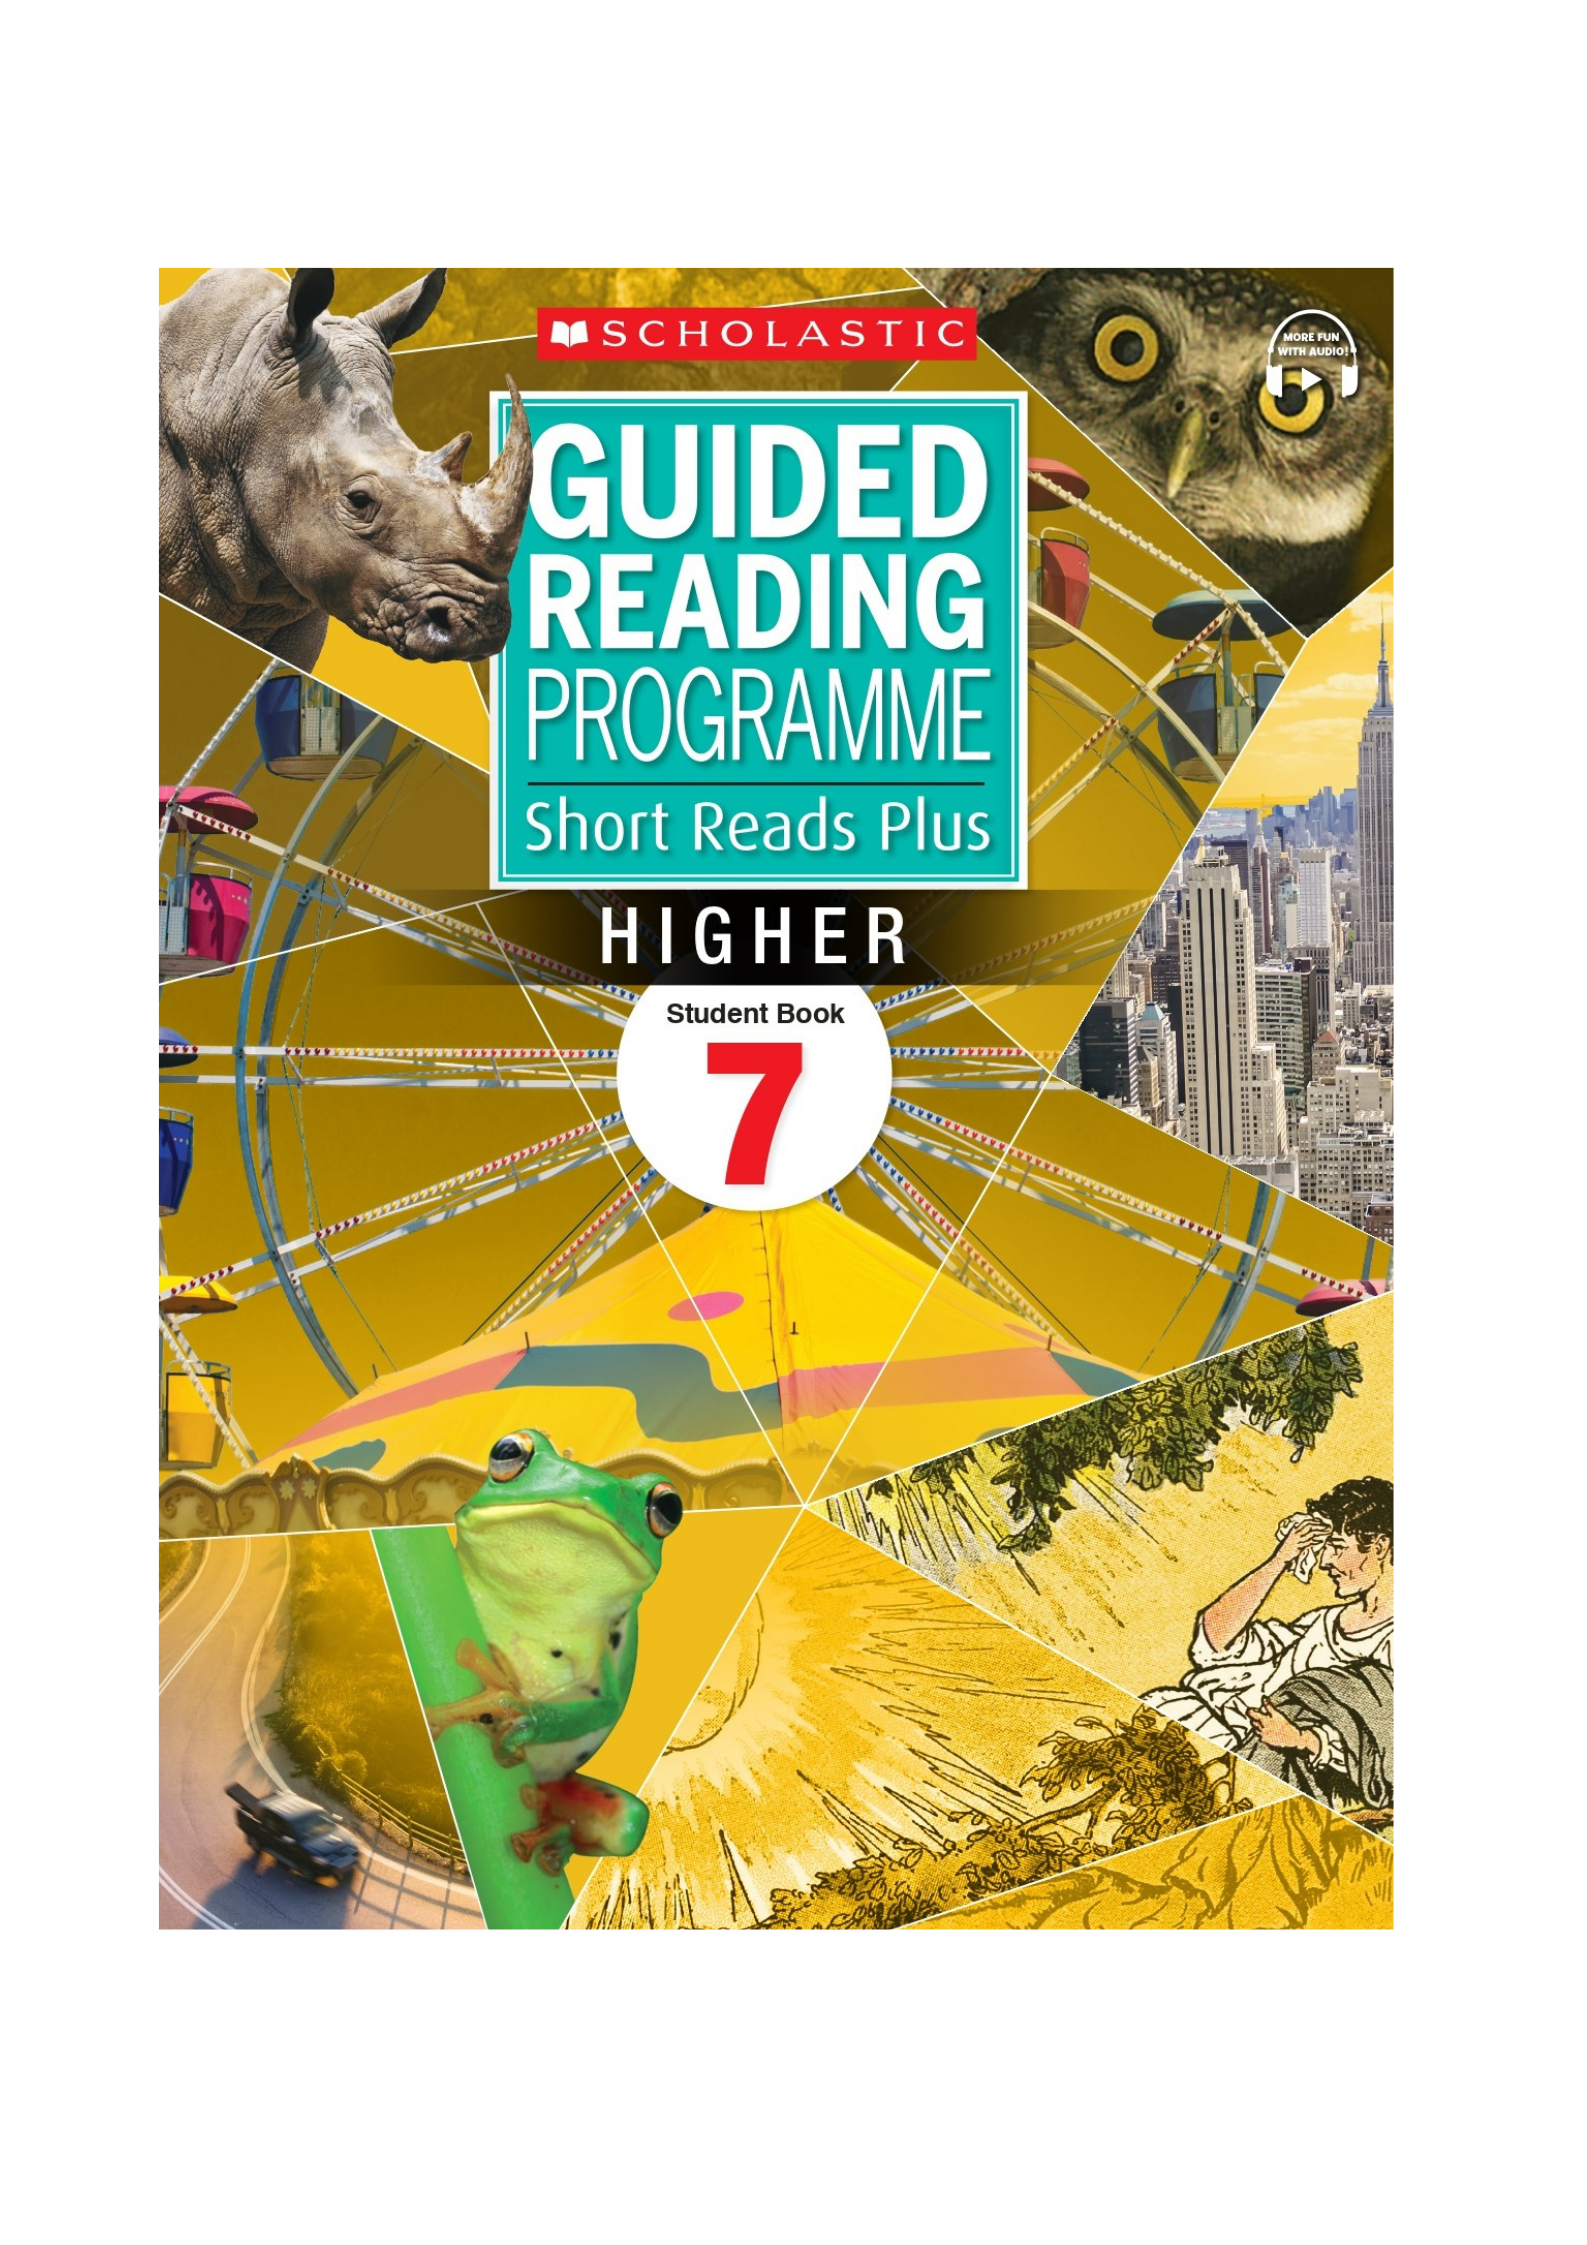 Guided Reading Short Reads Plus Higher Student Book – Level 7 (Asia)